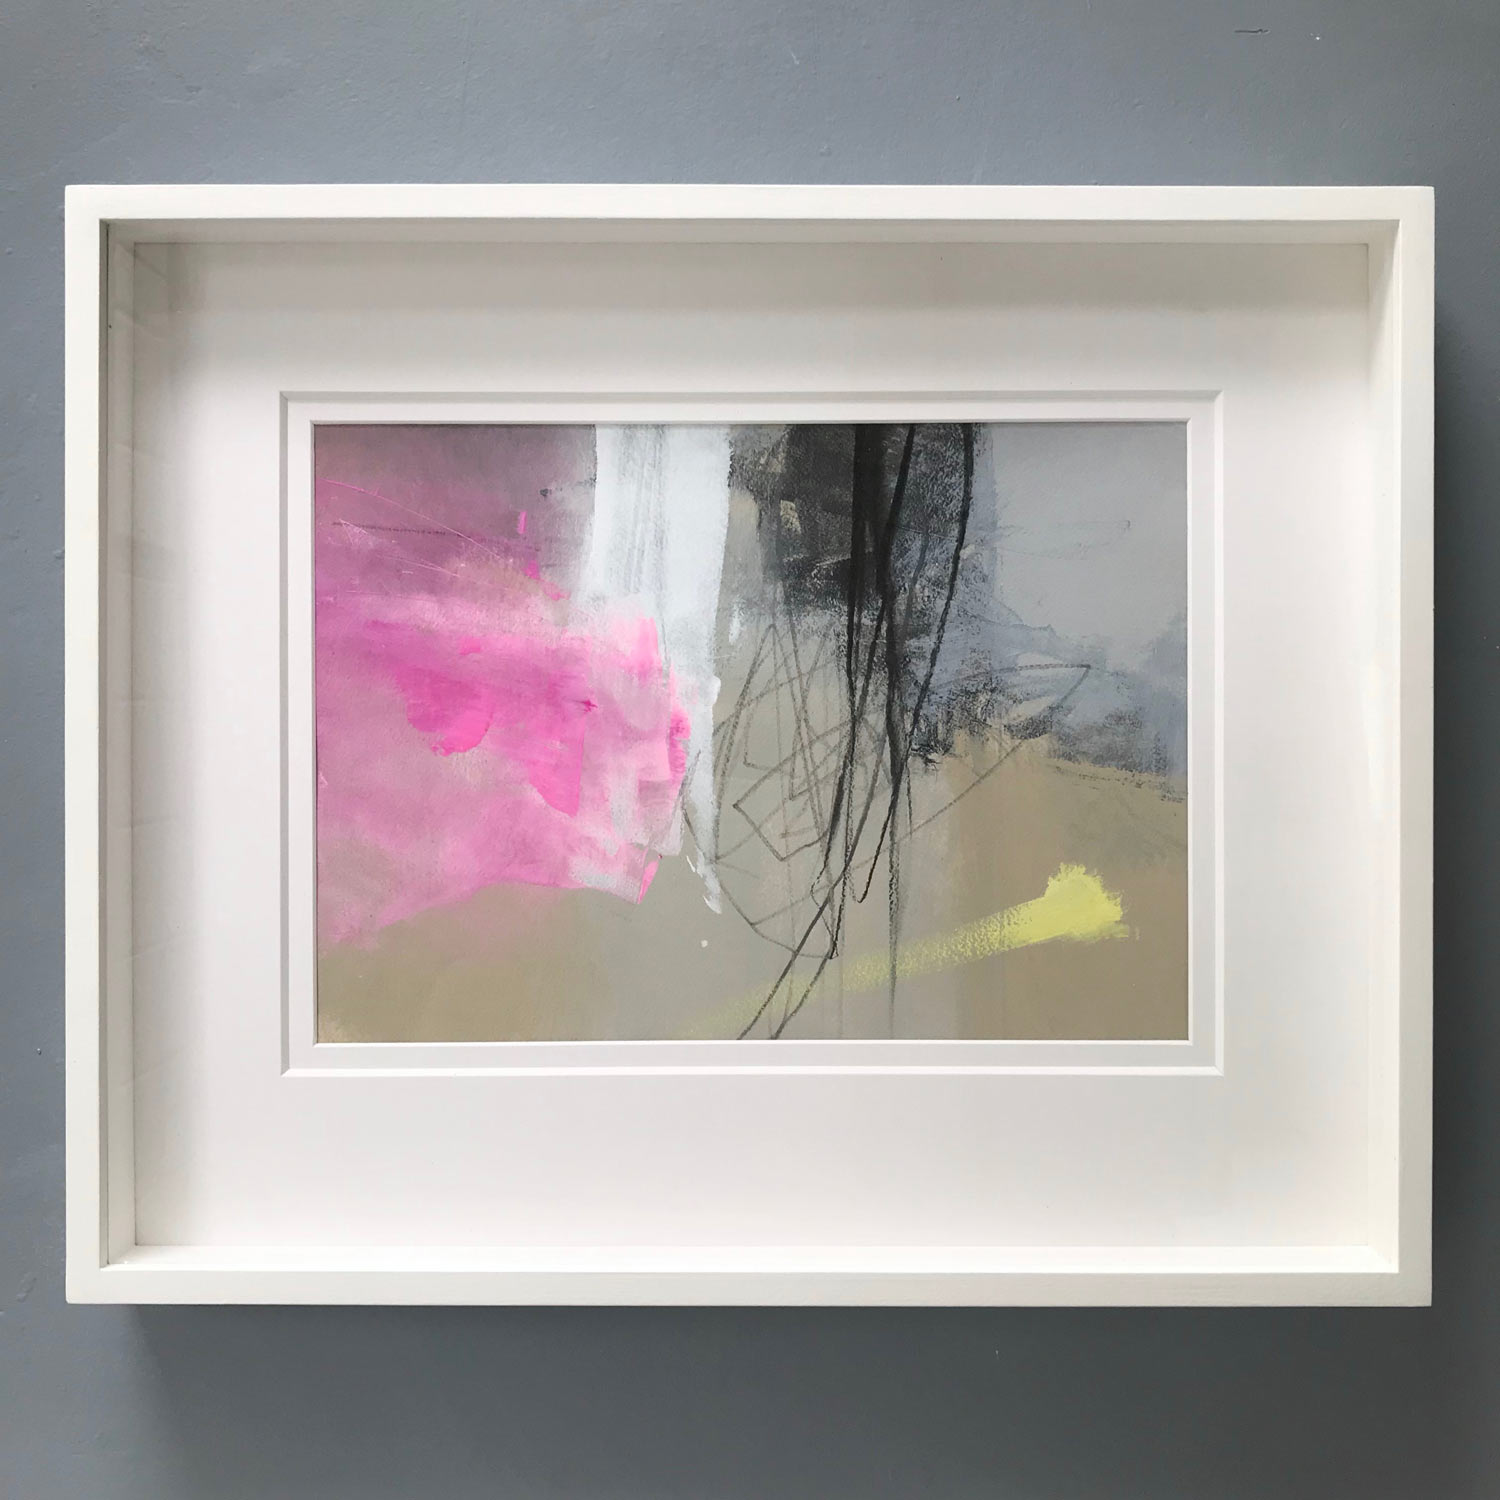 Autumn Air framed by Neil Canning for his studio collection winter 2021